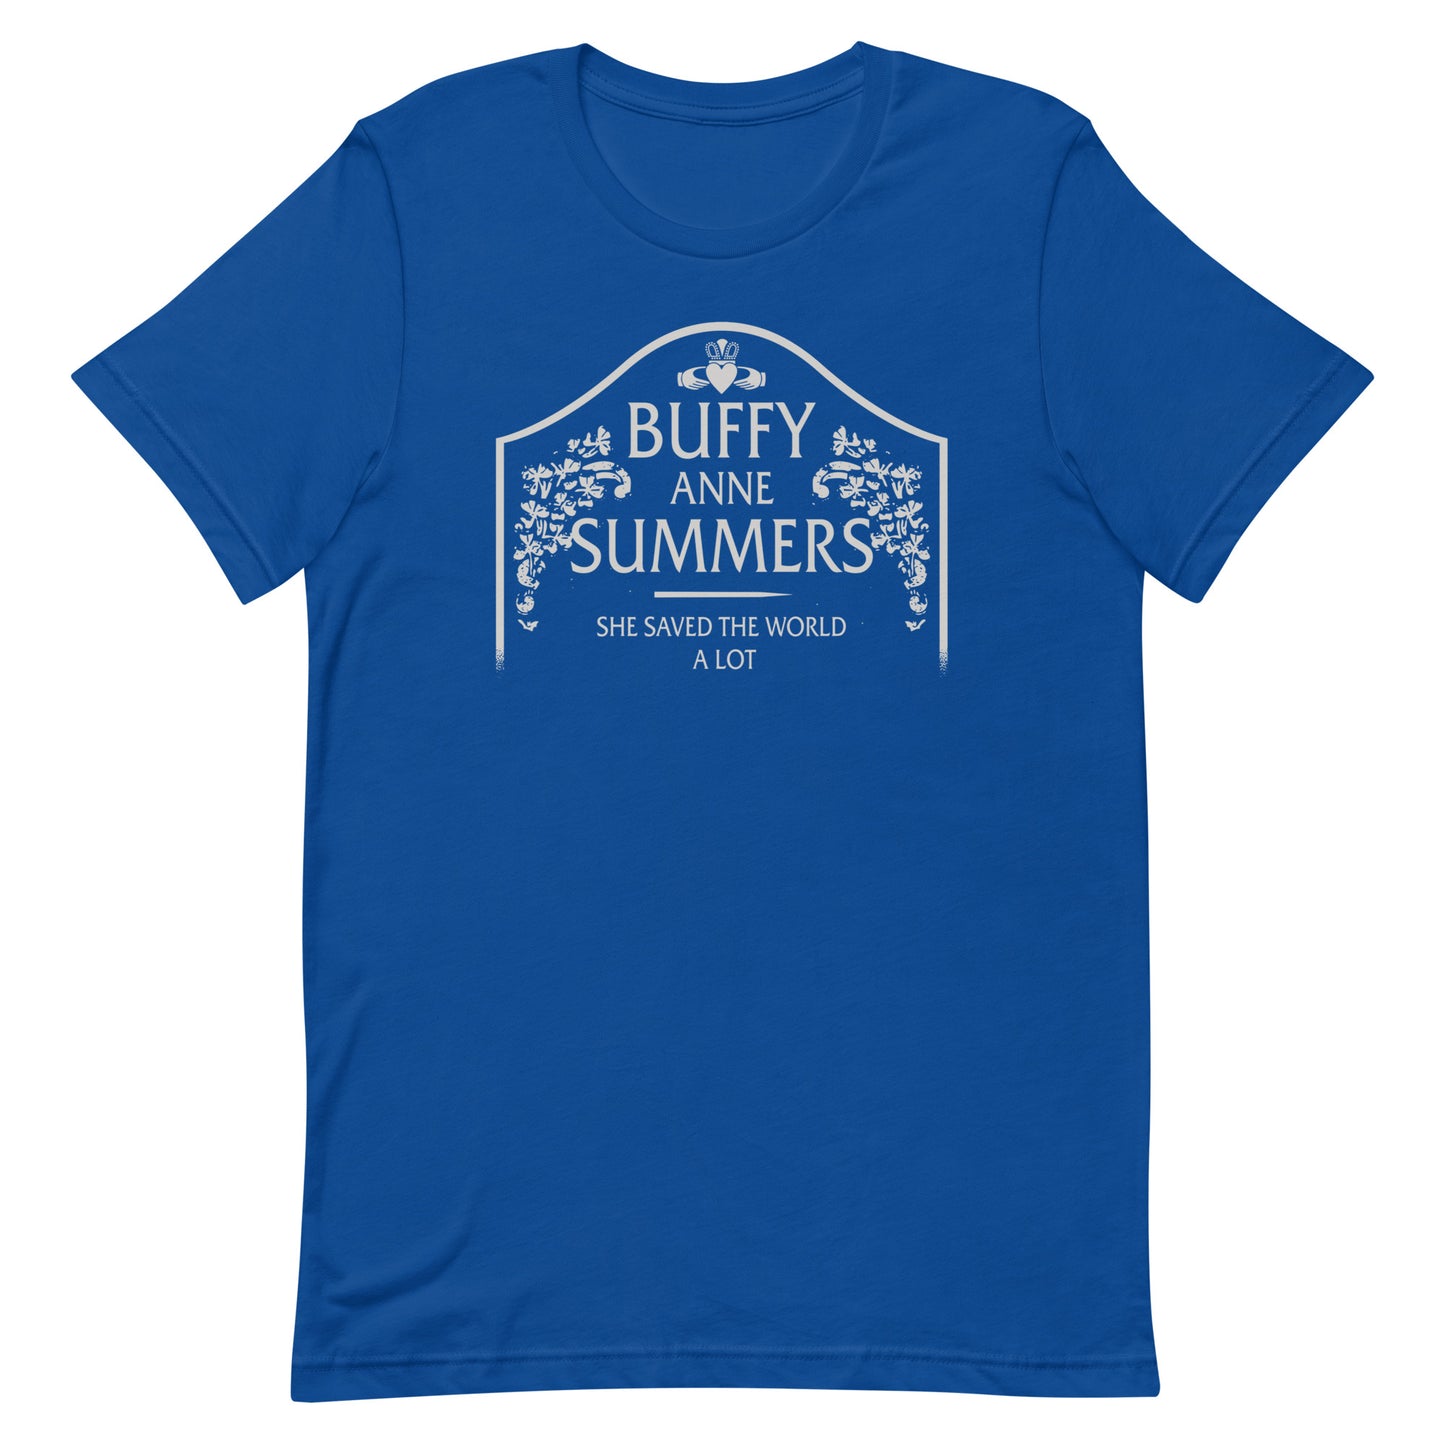 Buffy Anne Summers Men's Signature Tee